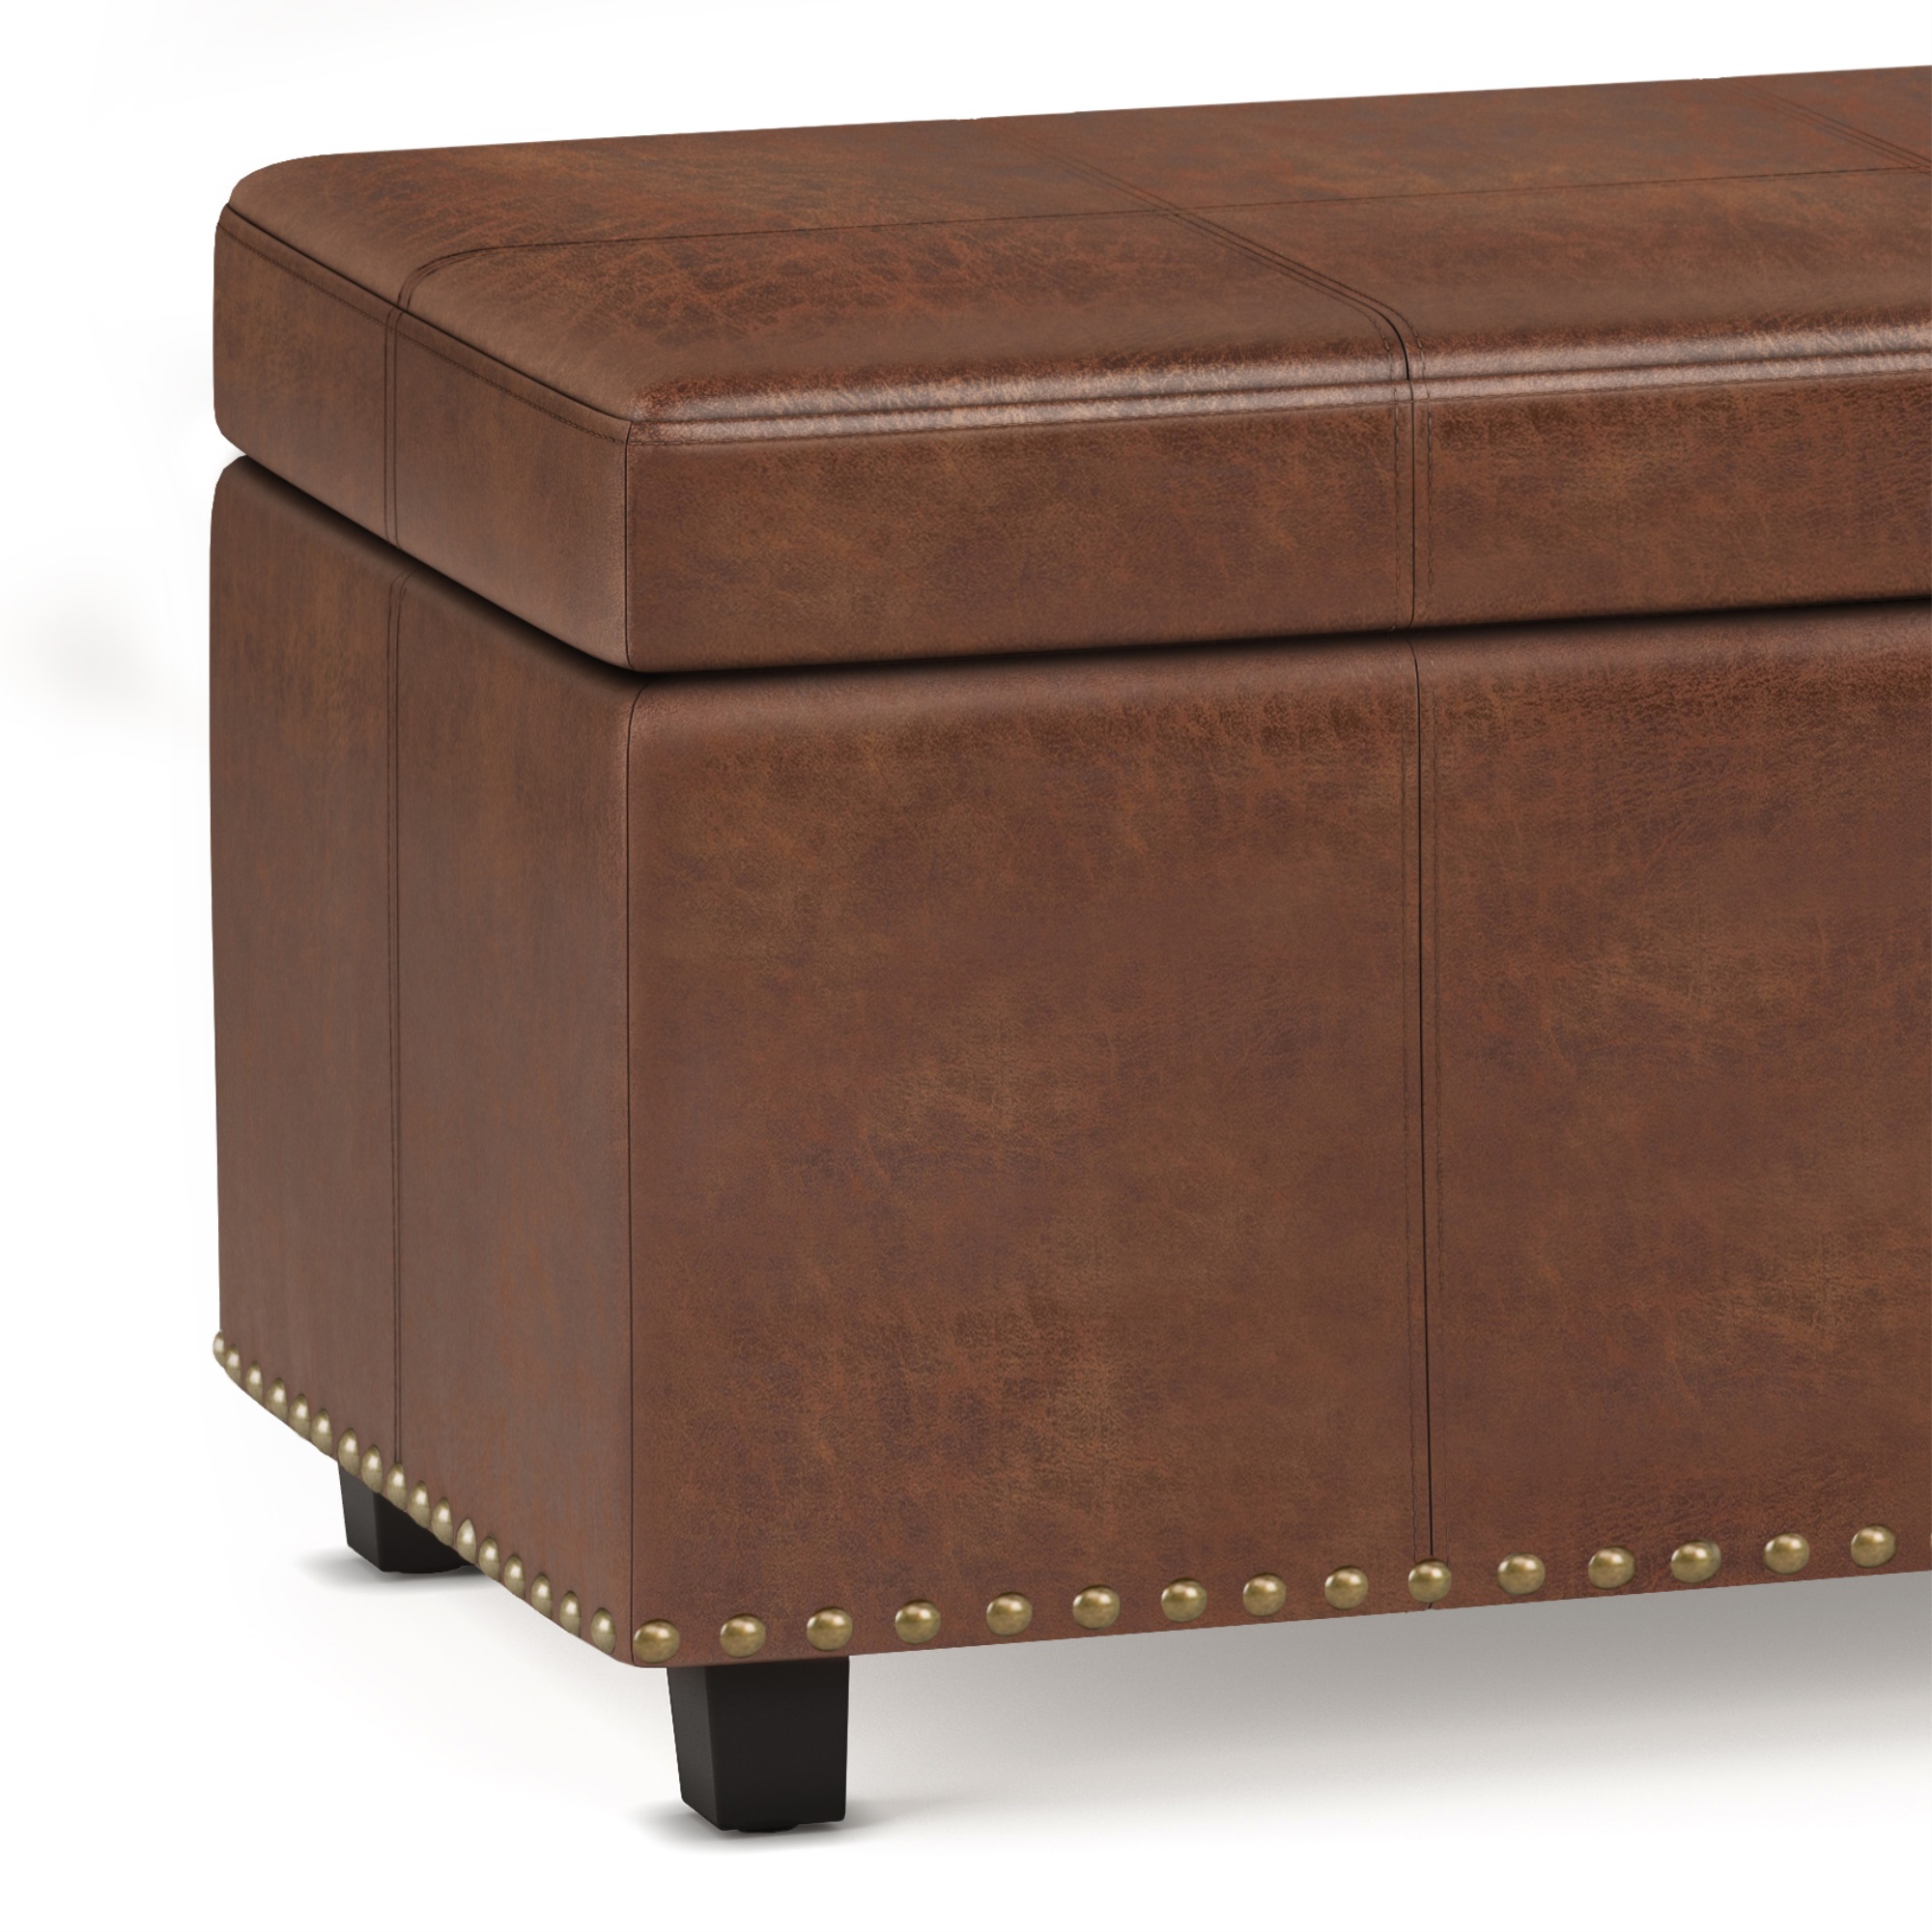 Kingsley Large Storage Ottoman, Distressed Leather Ottoman Rectangle